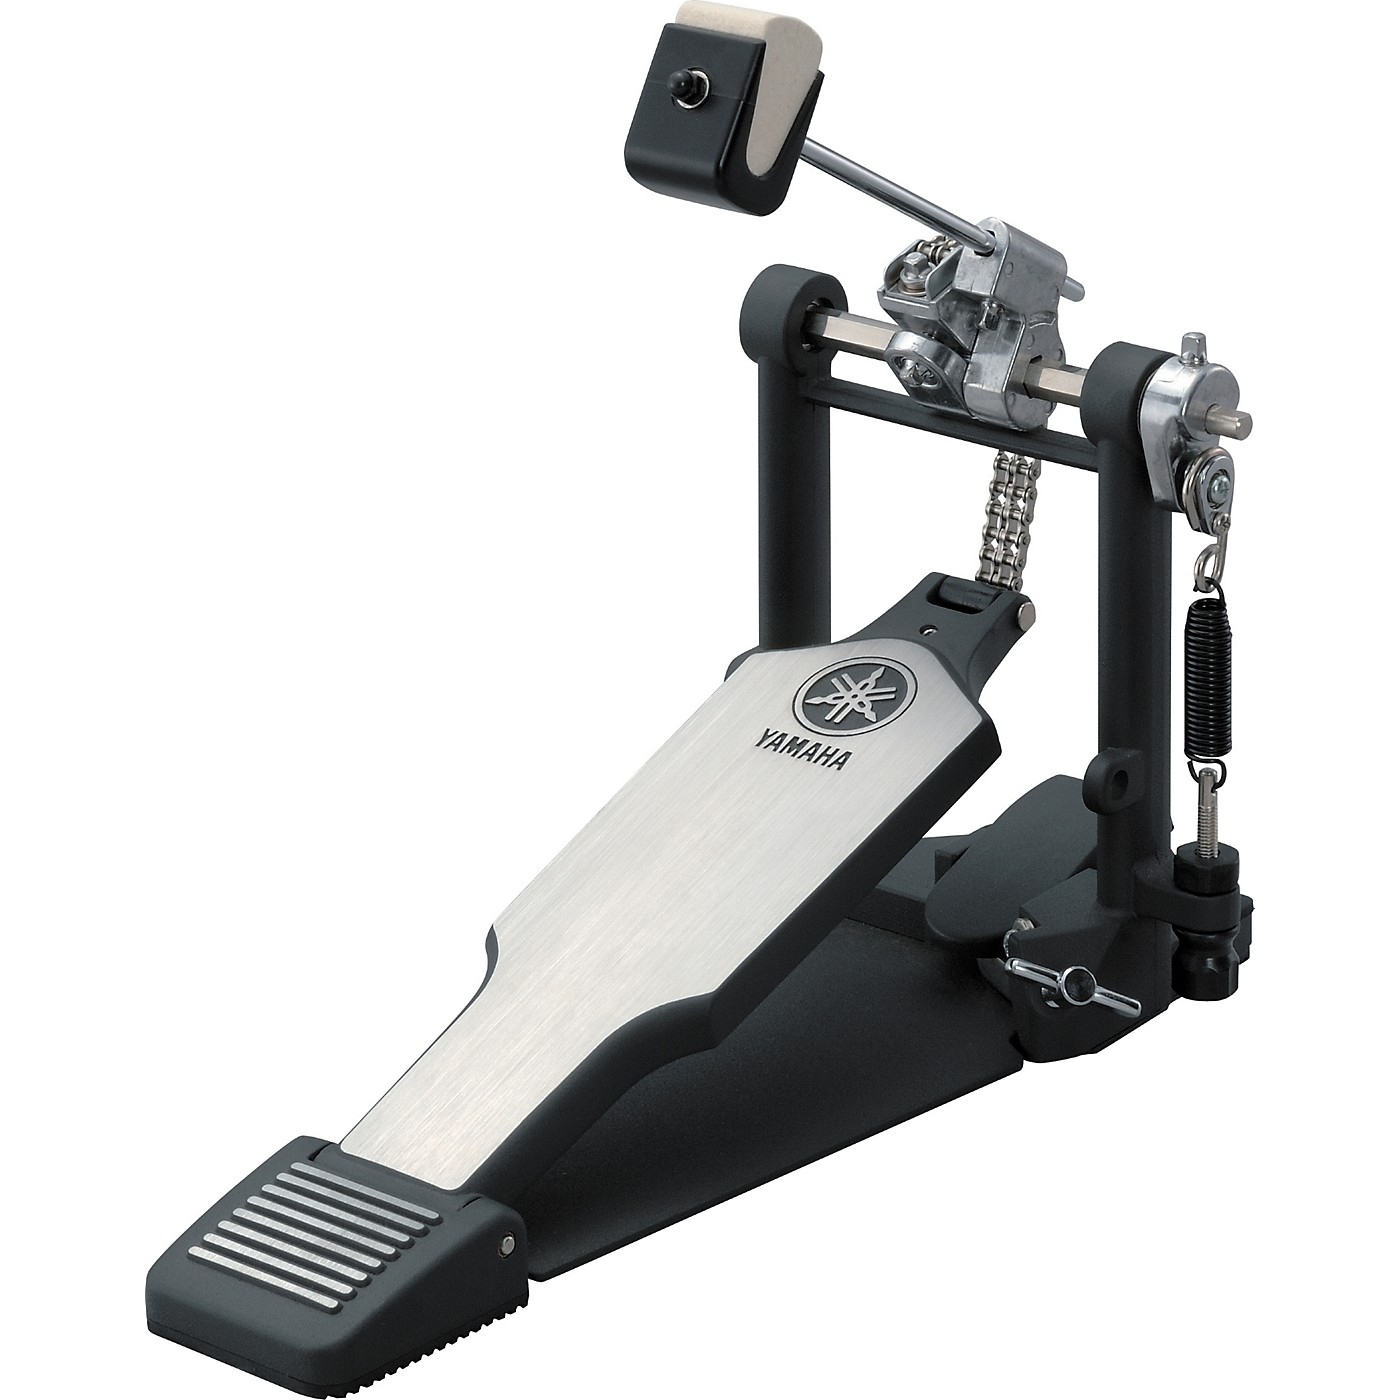 Yamaha Bass Drum Pedal with Chain Drive thumbnail